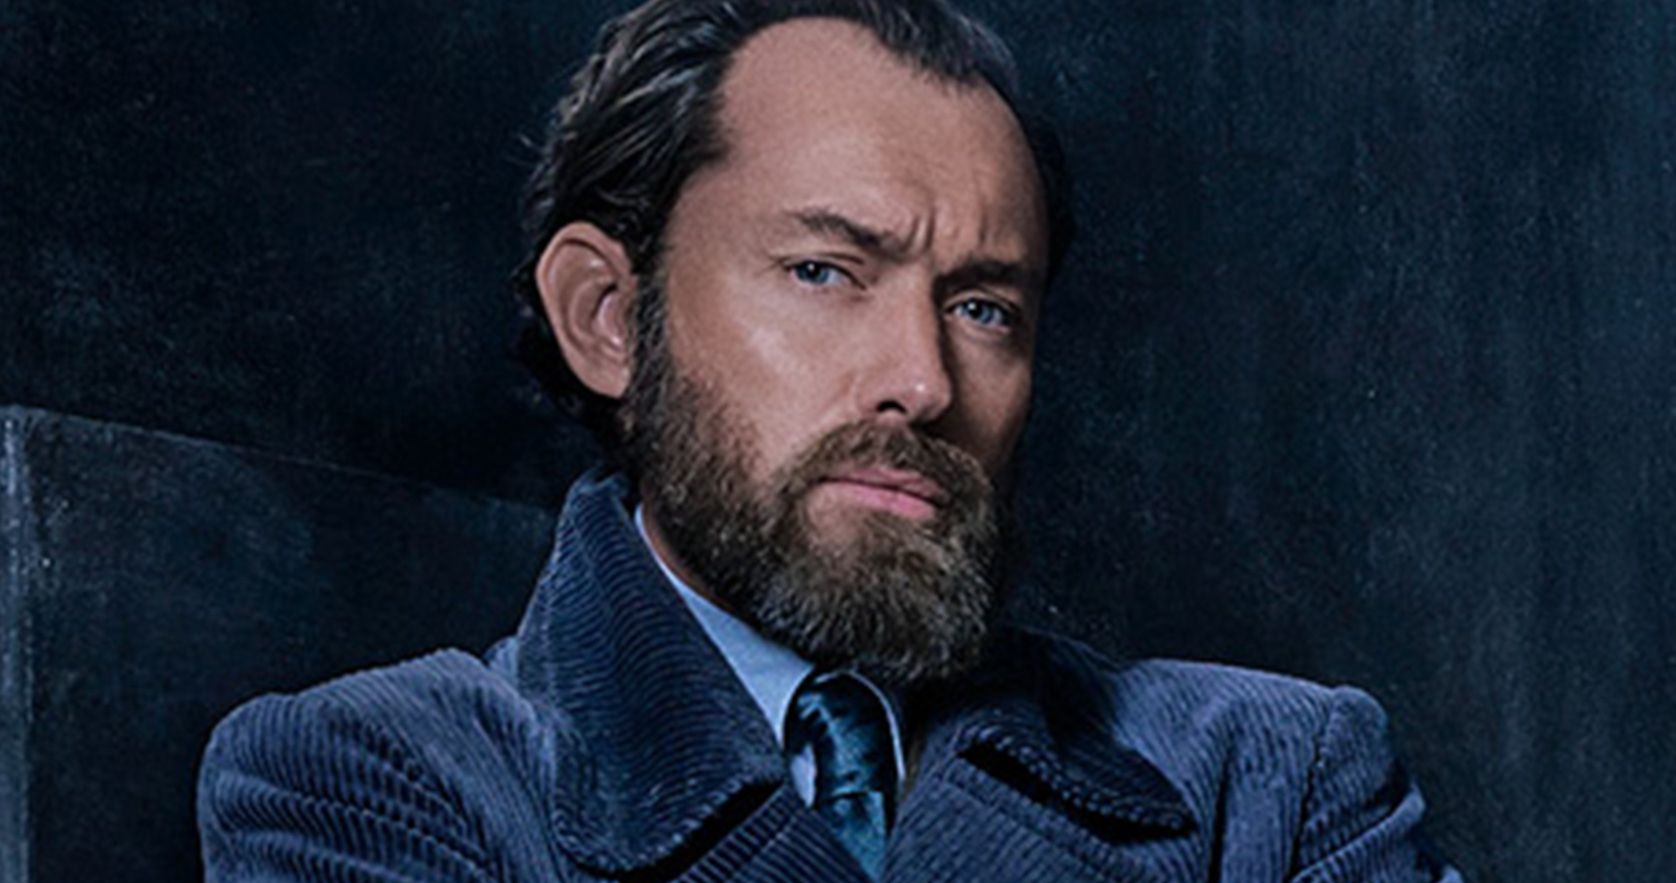 Jude Law Talks Becoming Dumbledore with Help from Harry Potter Creator J.K. Rowling